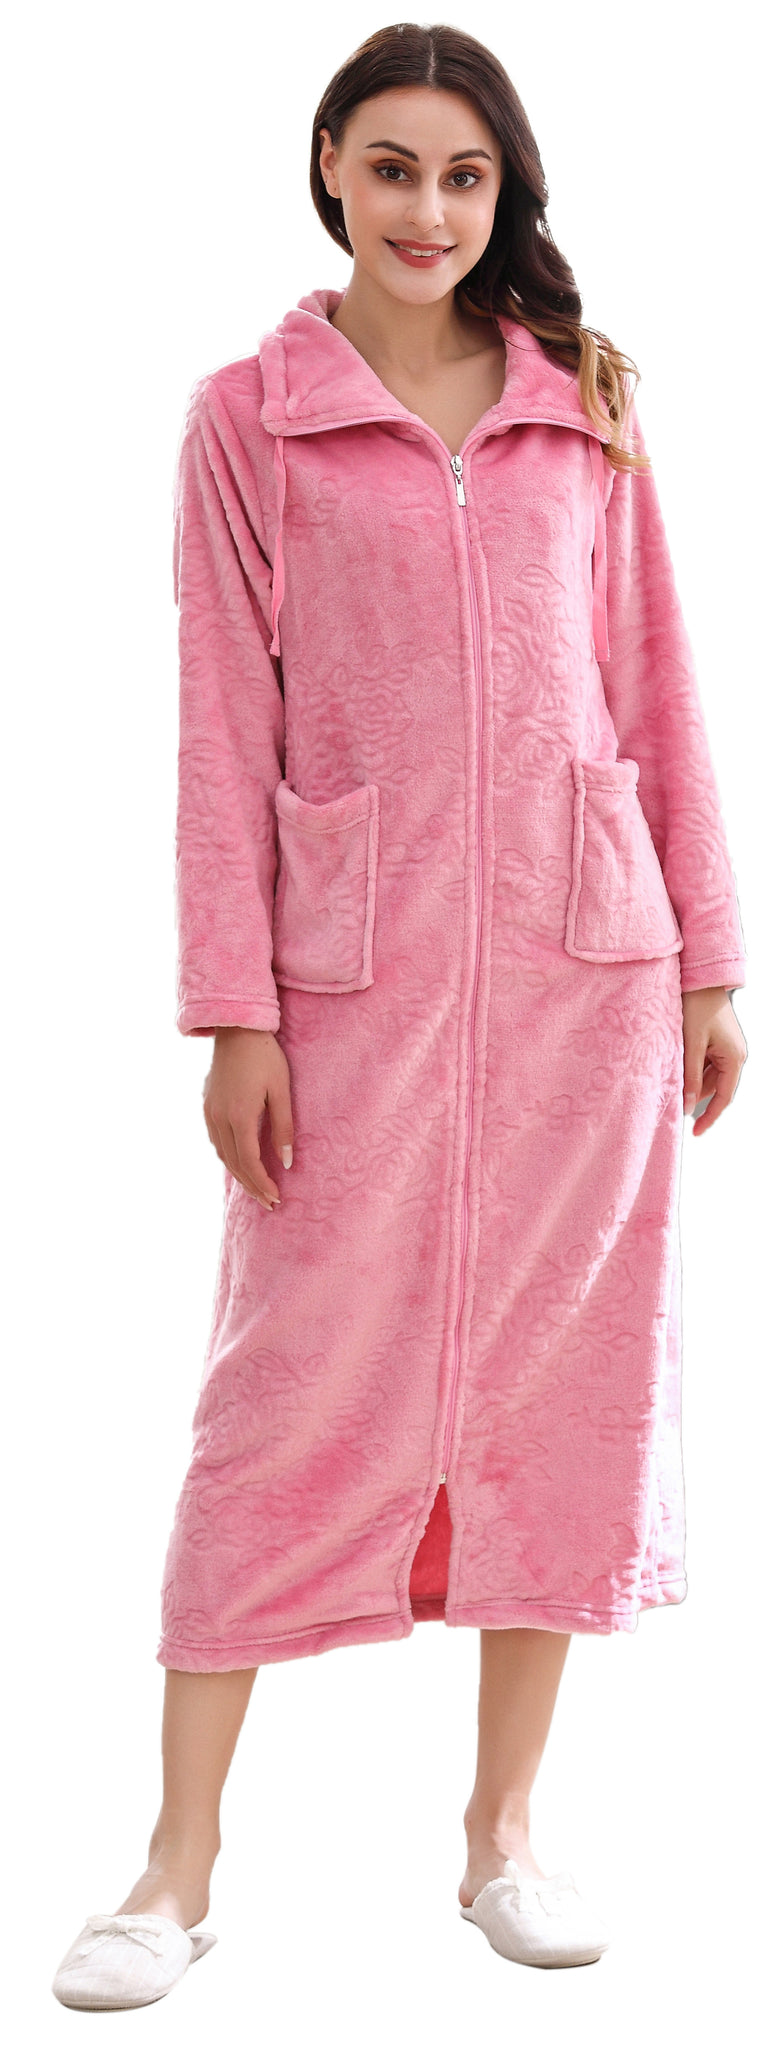 Women's Terry Towelling Zip Through Bath Robe, 100% Cotton Dressing Gown.  Buy Now For £20.00.